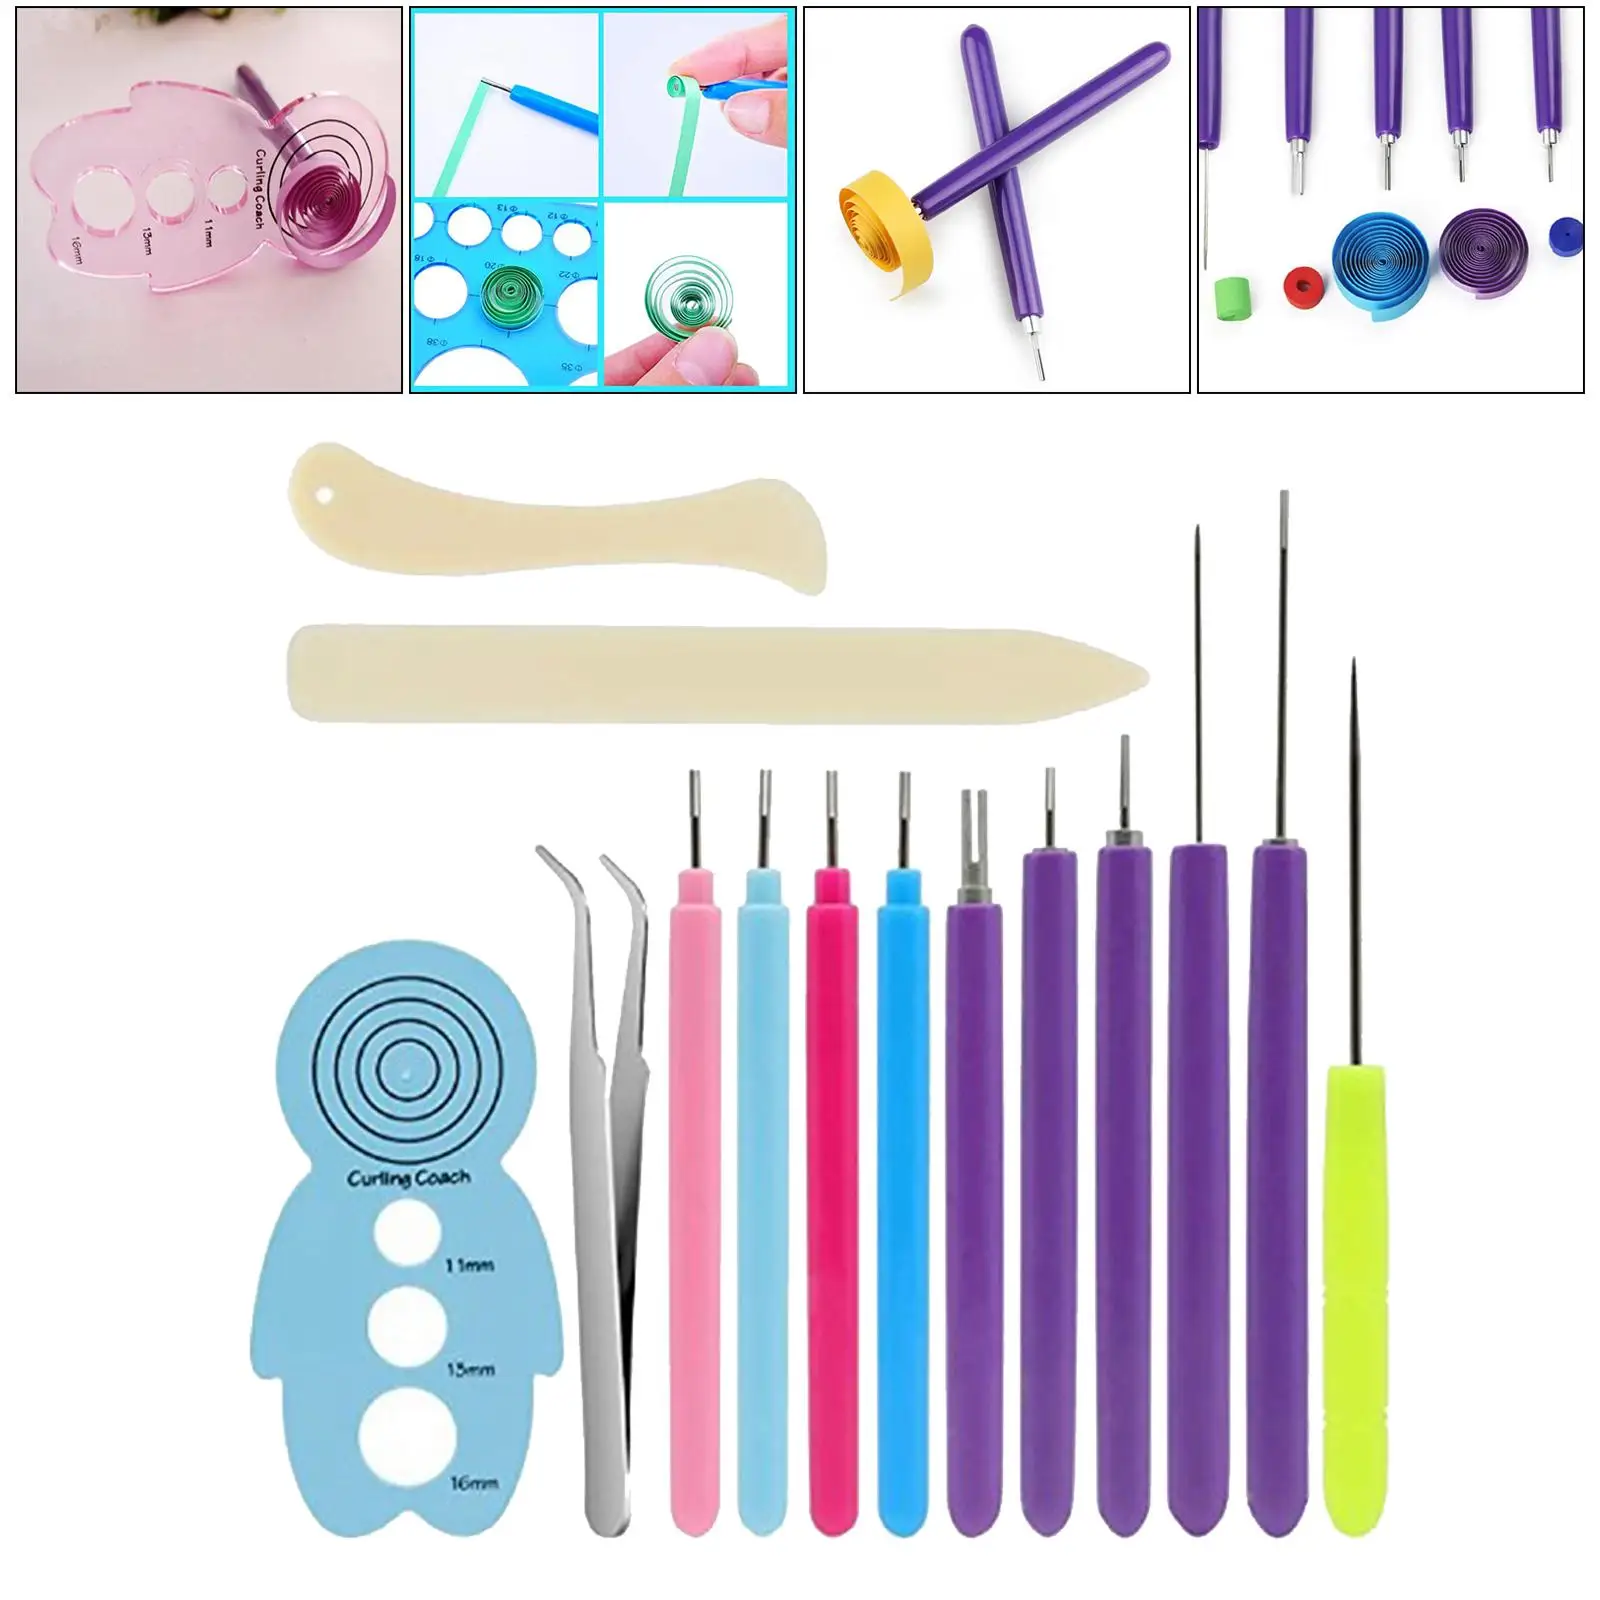 Quilling Tools Slotted Supplies Rolling Tool Set for DIY Beginner Adults